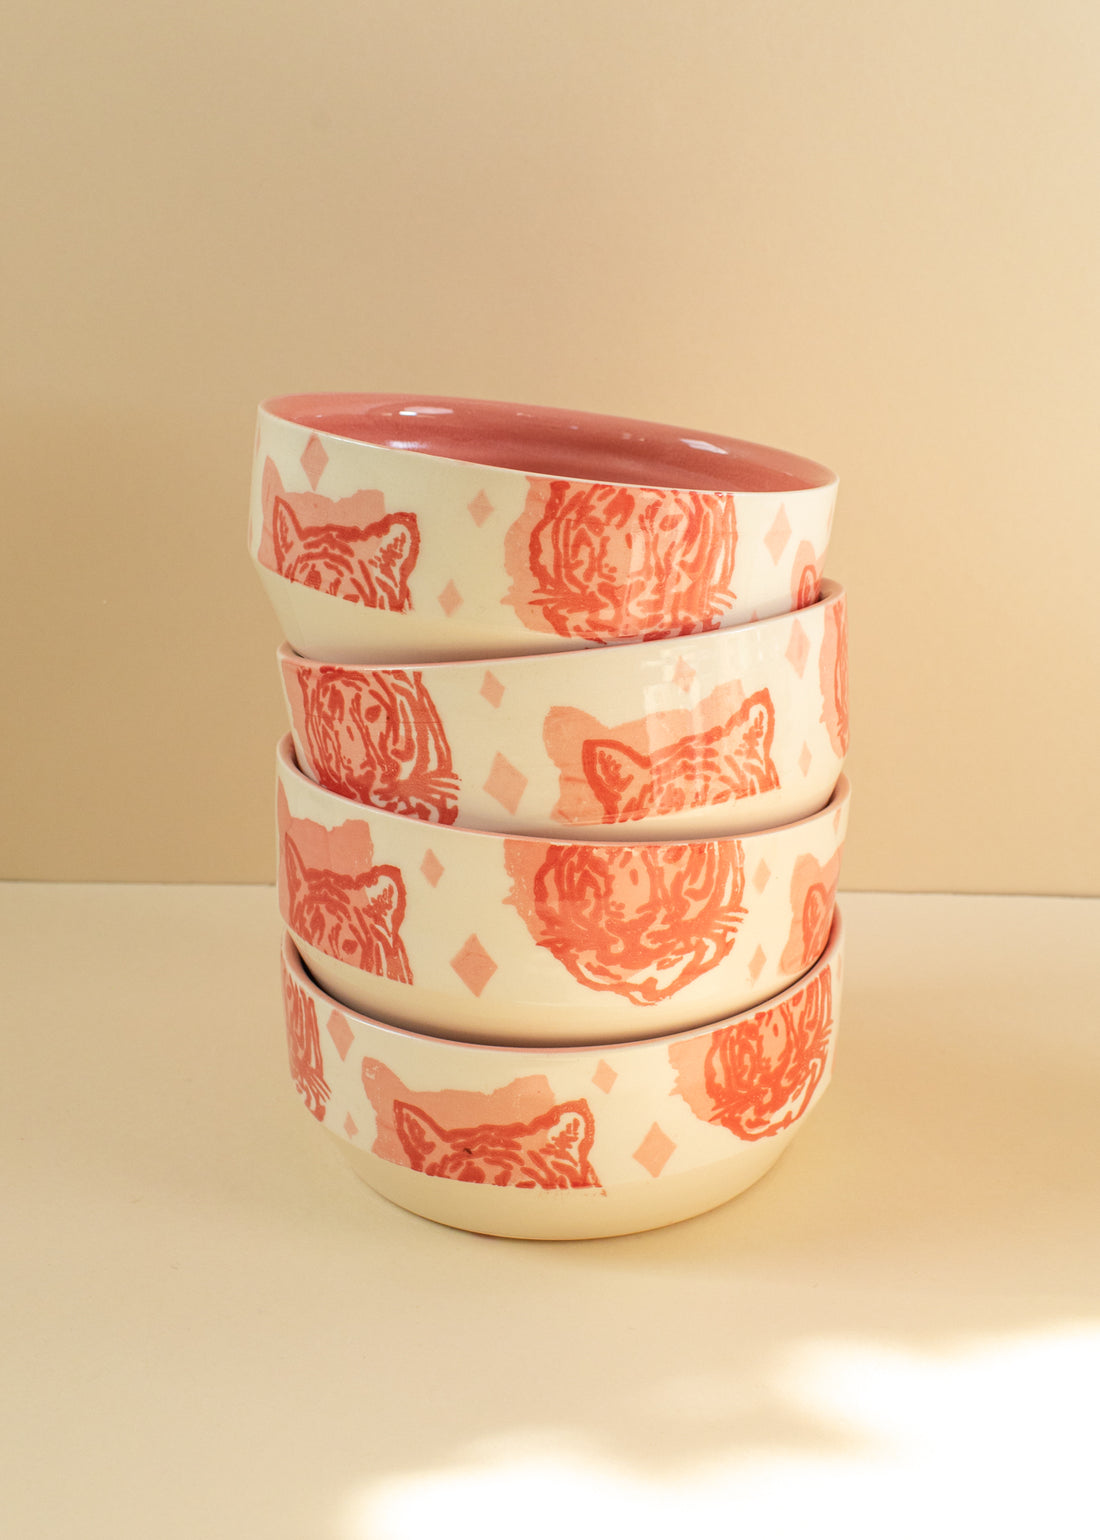 4 cream bowls with tiger faces screen-printed on them